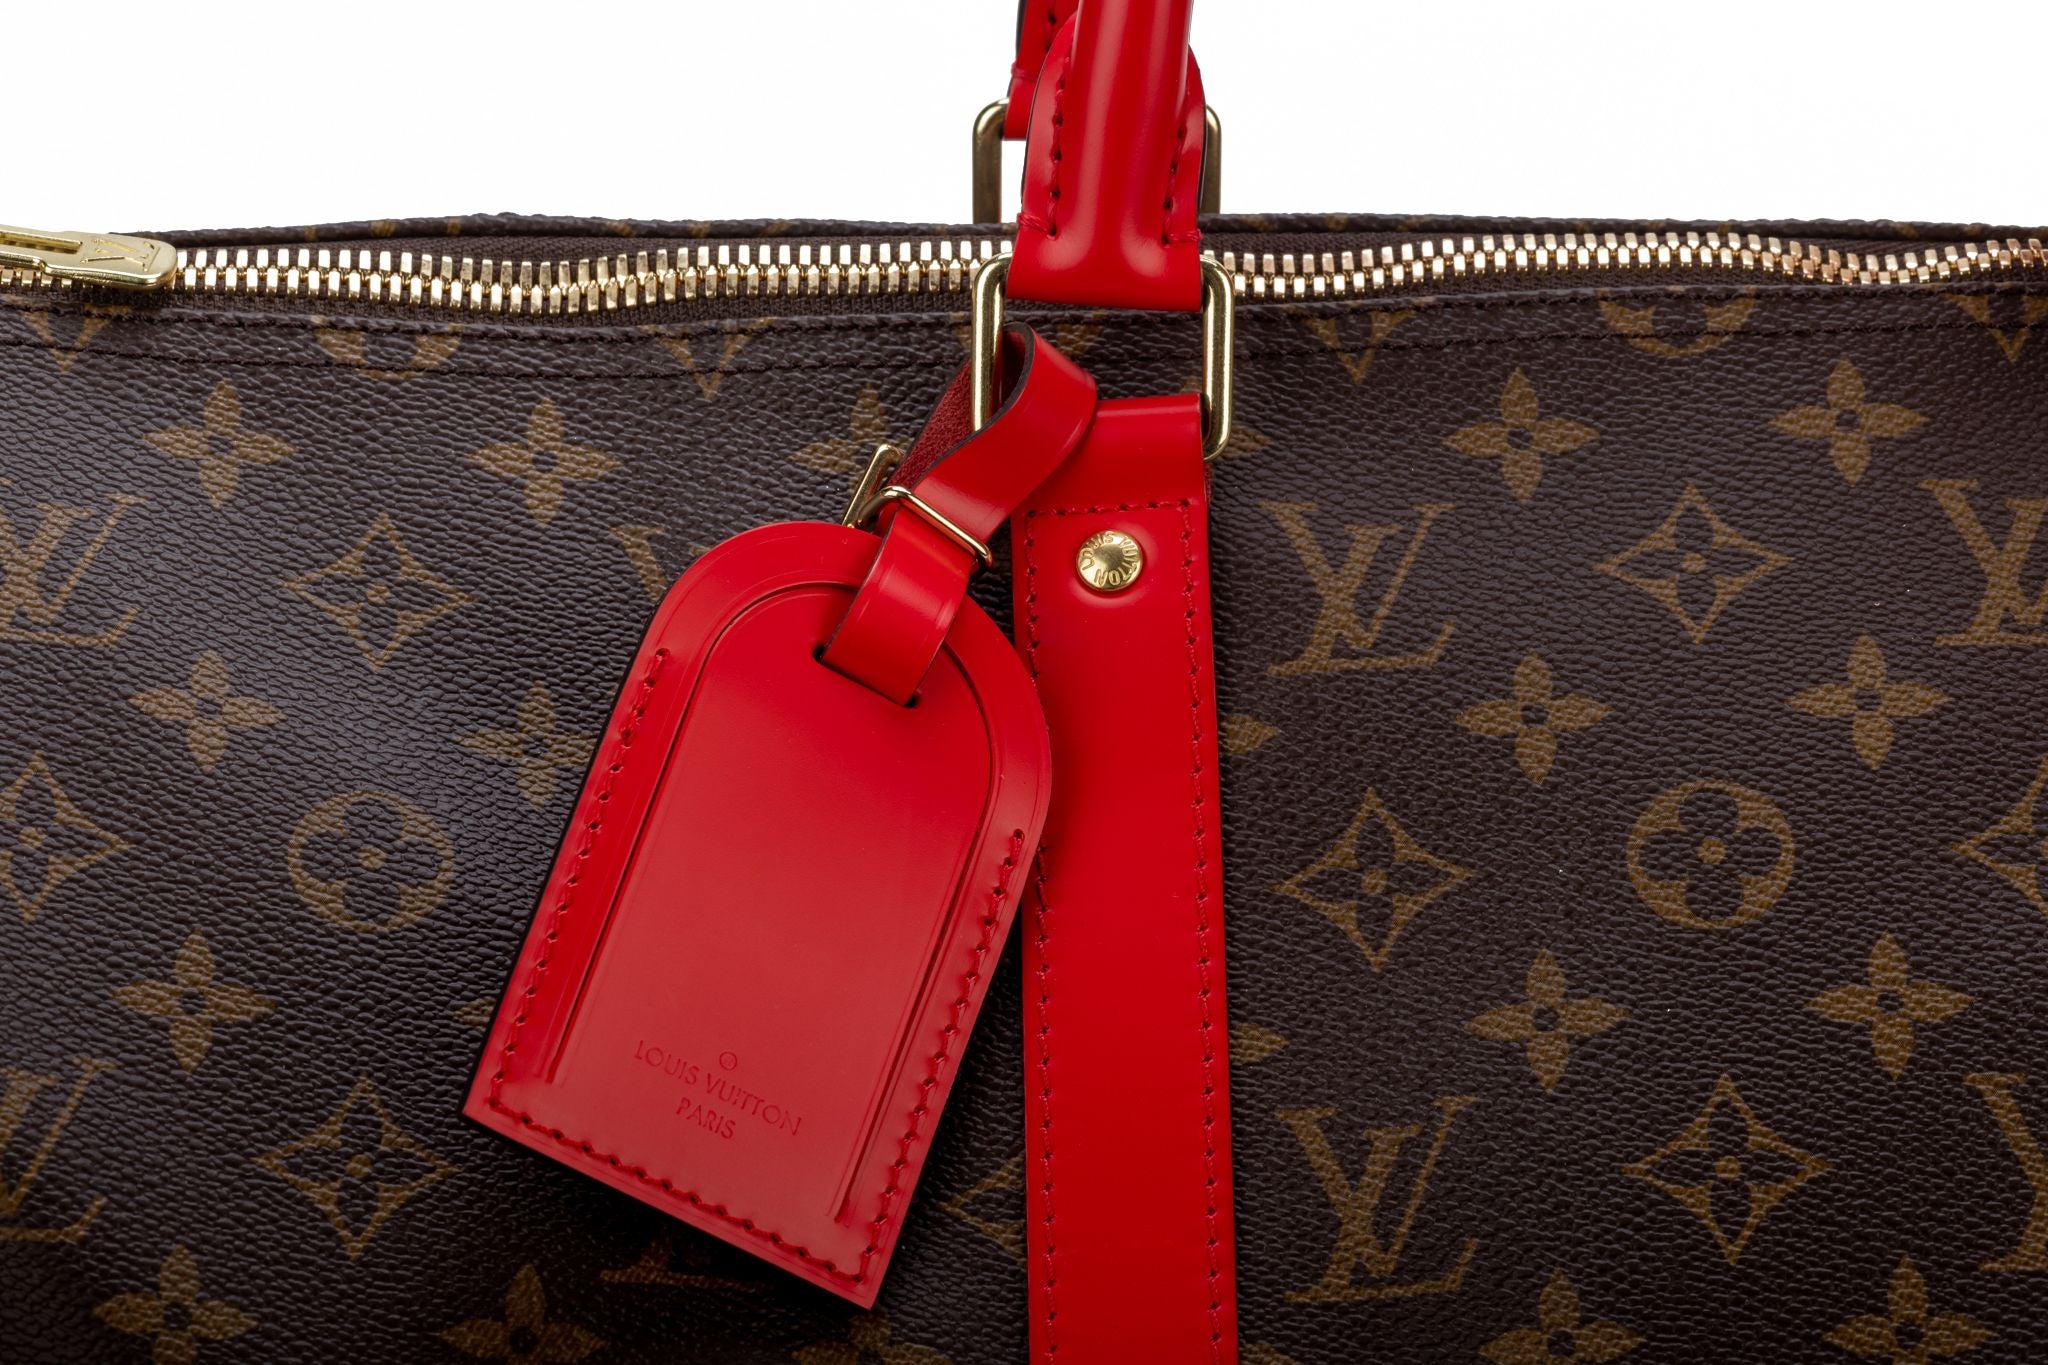 Louis Vuitton Keepall 50 Bandouliere Monogram Red Coquelicot Duffle Bag